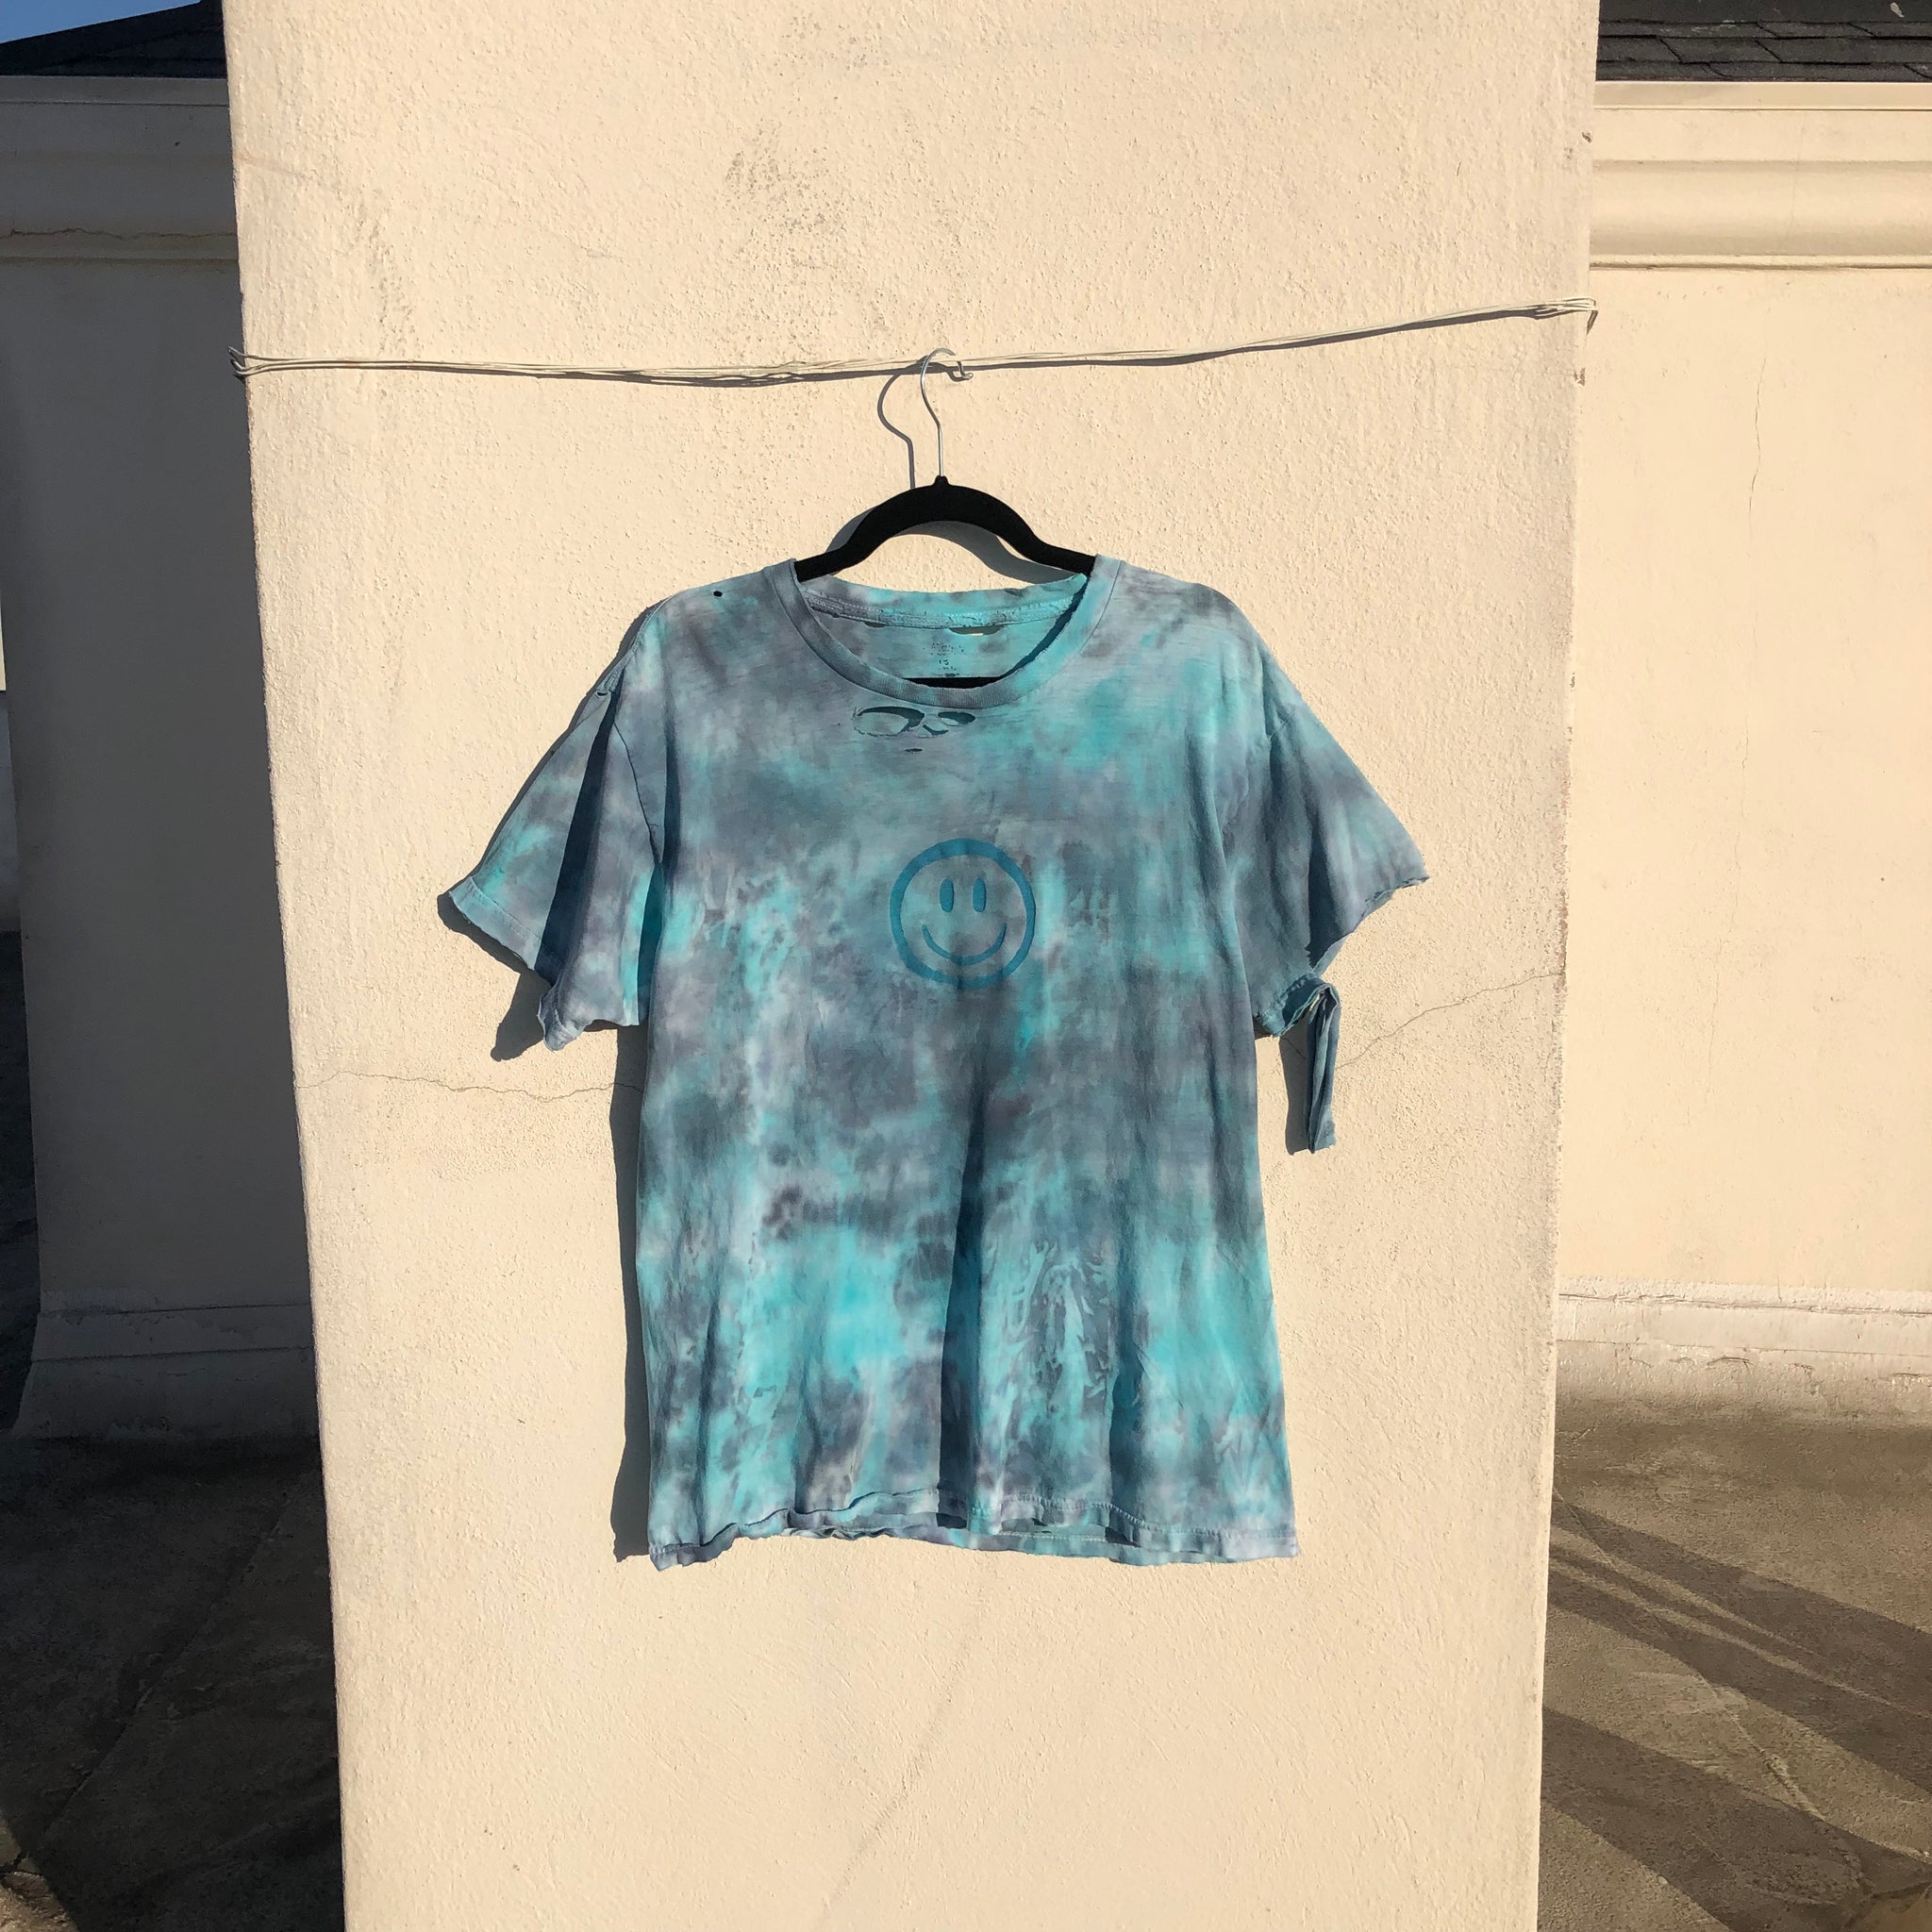 1/1 DISTRESSED DYED SMILEY TEE